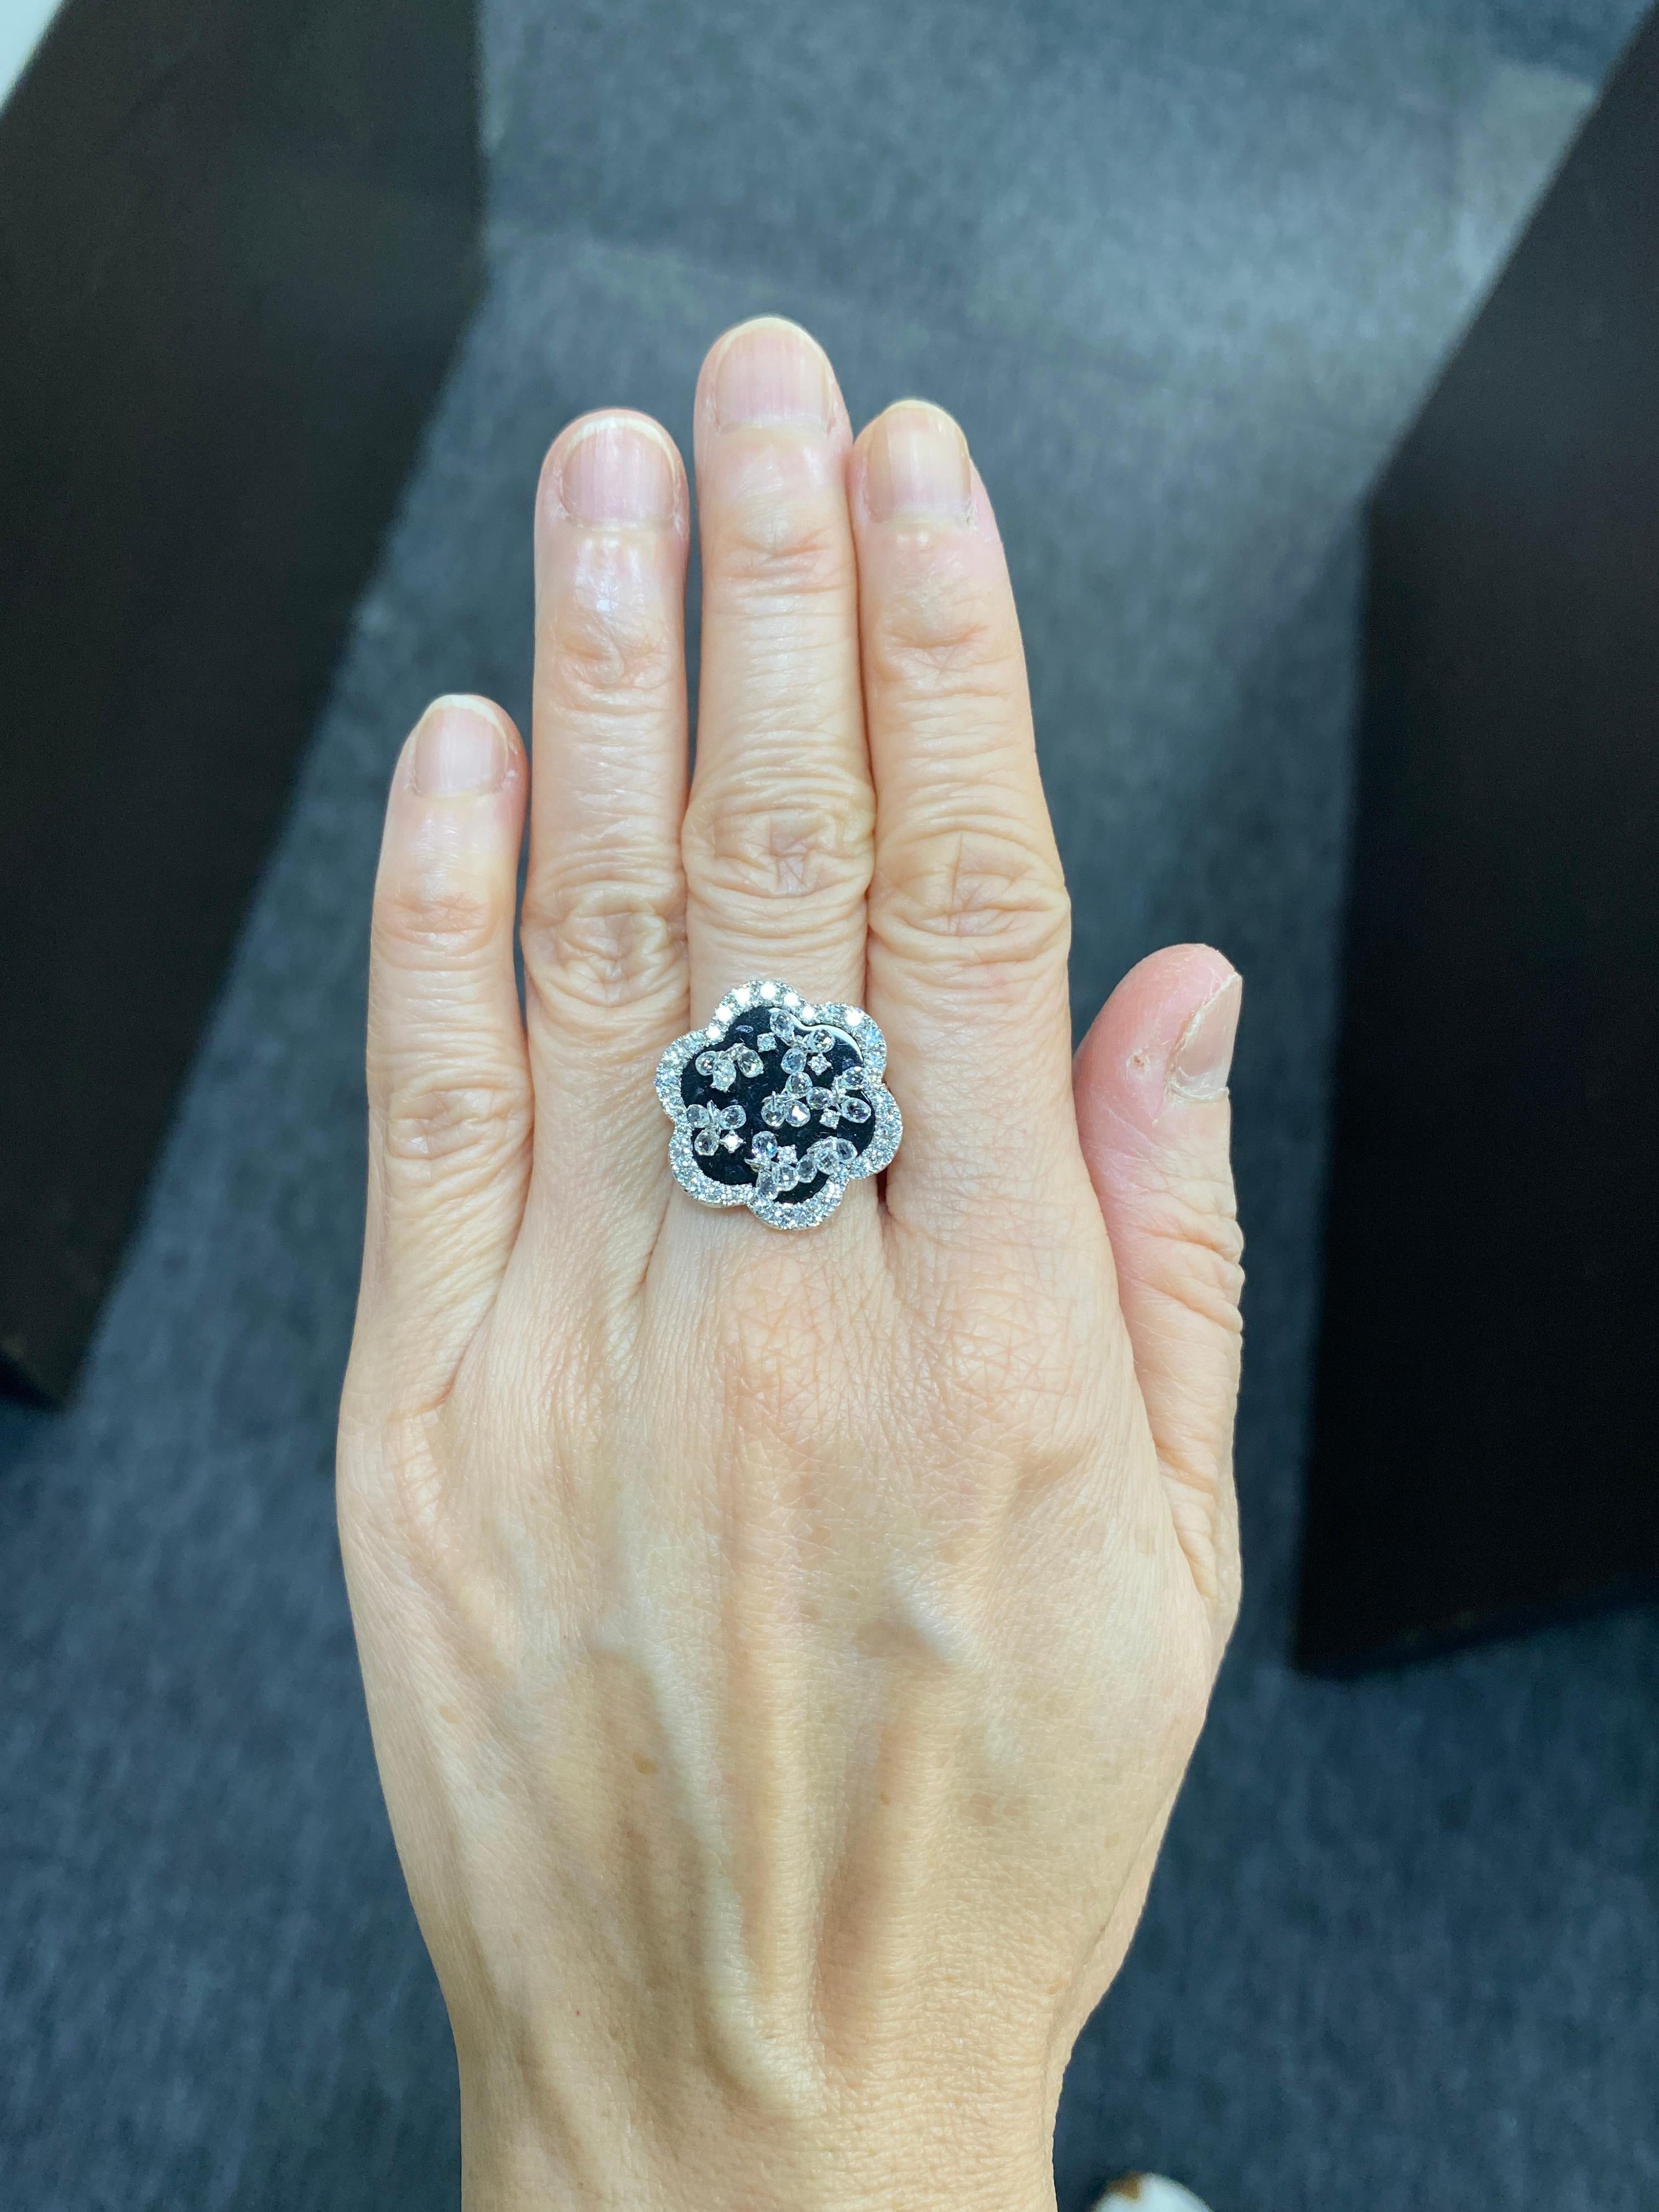 JR Briolette Diamond and Onyx Flower 18 Karat White Gold Ring

Our eccentric flower dangling diamond Briolettes ring is an absolute show-stopper. The Briolette diamonds & Onyx used in it enhances it's look by many folds. 

Ring Size Europe 54 (US